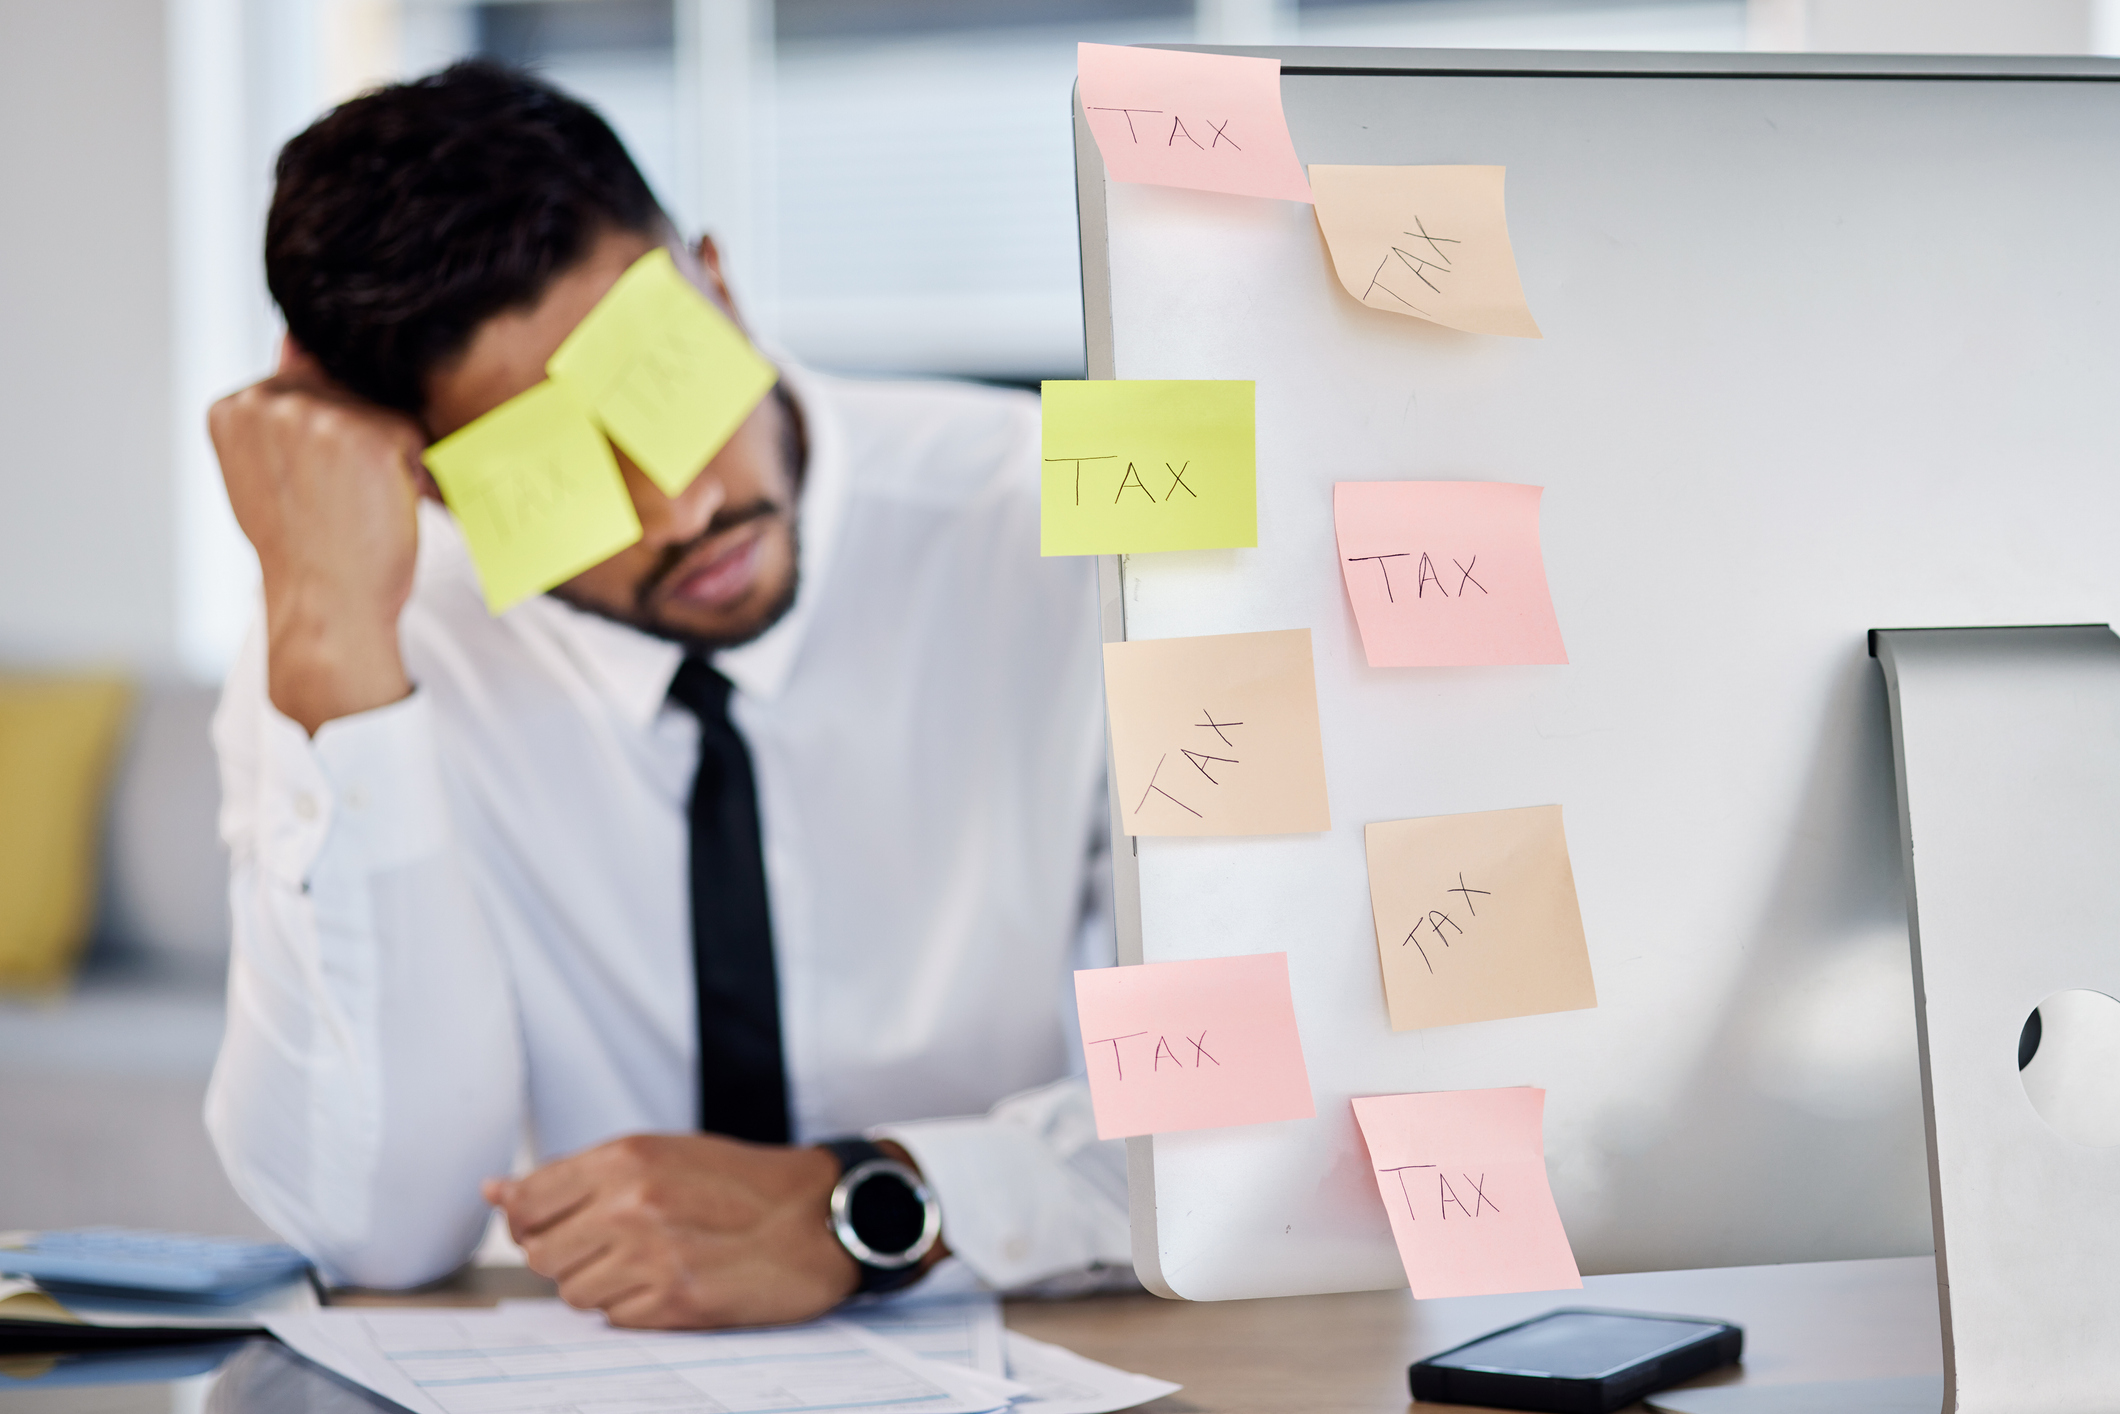 A man at a desk appears overwhelmed by tax work, with sticky notes labeled "TAX" on his forehead and computer